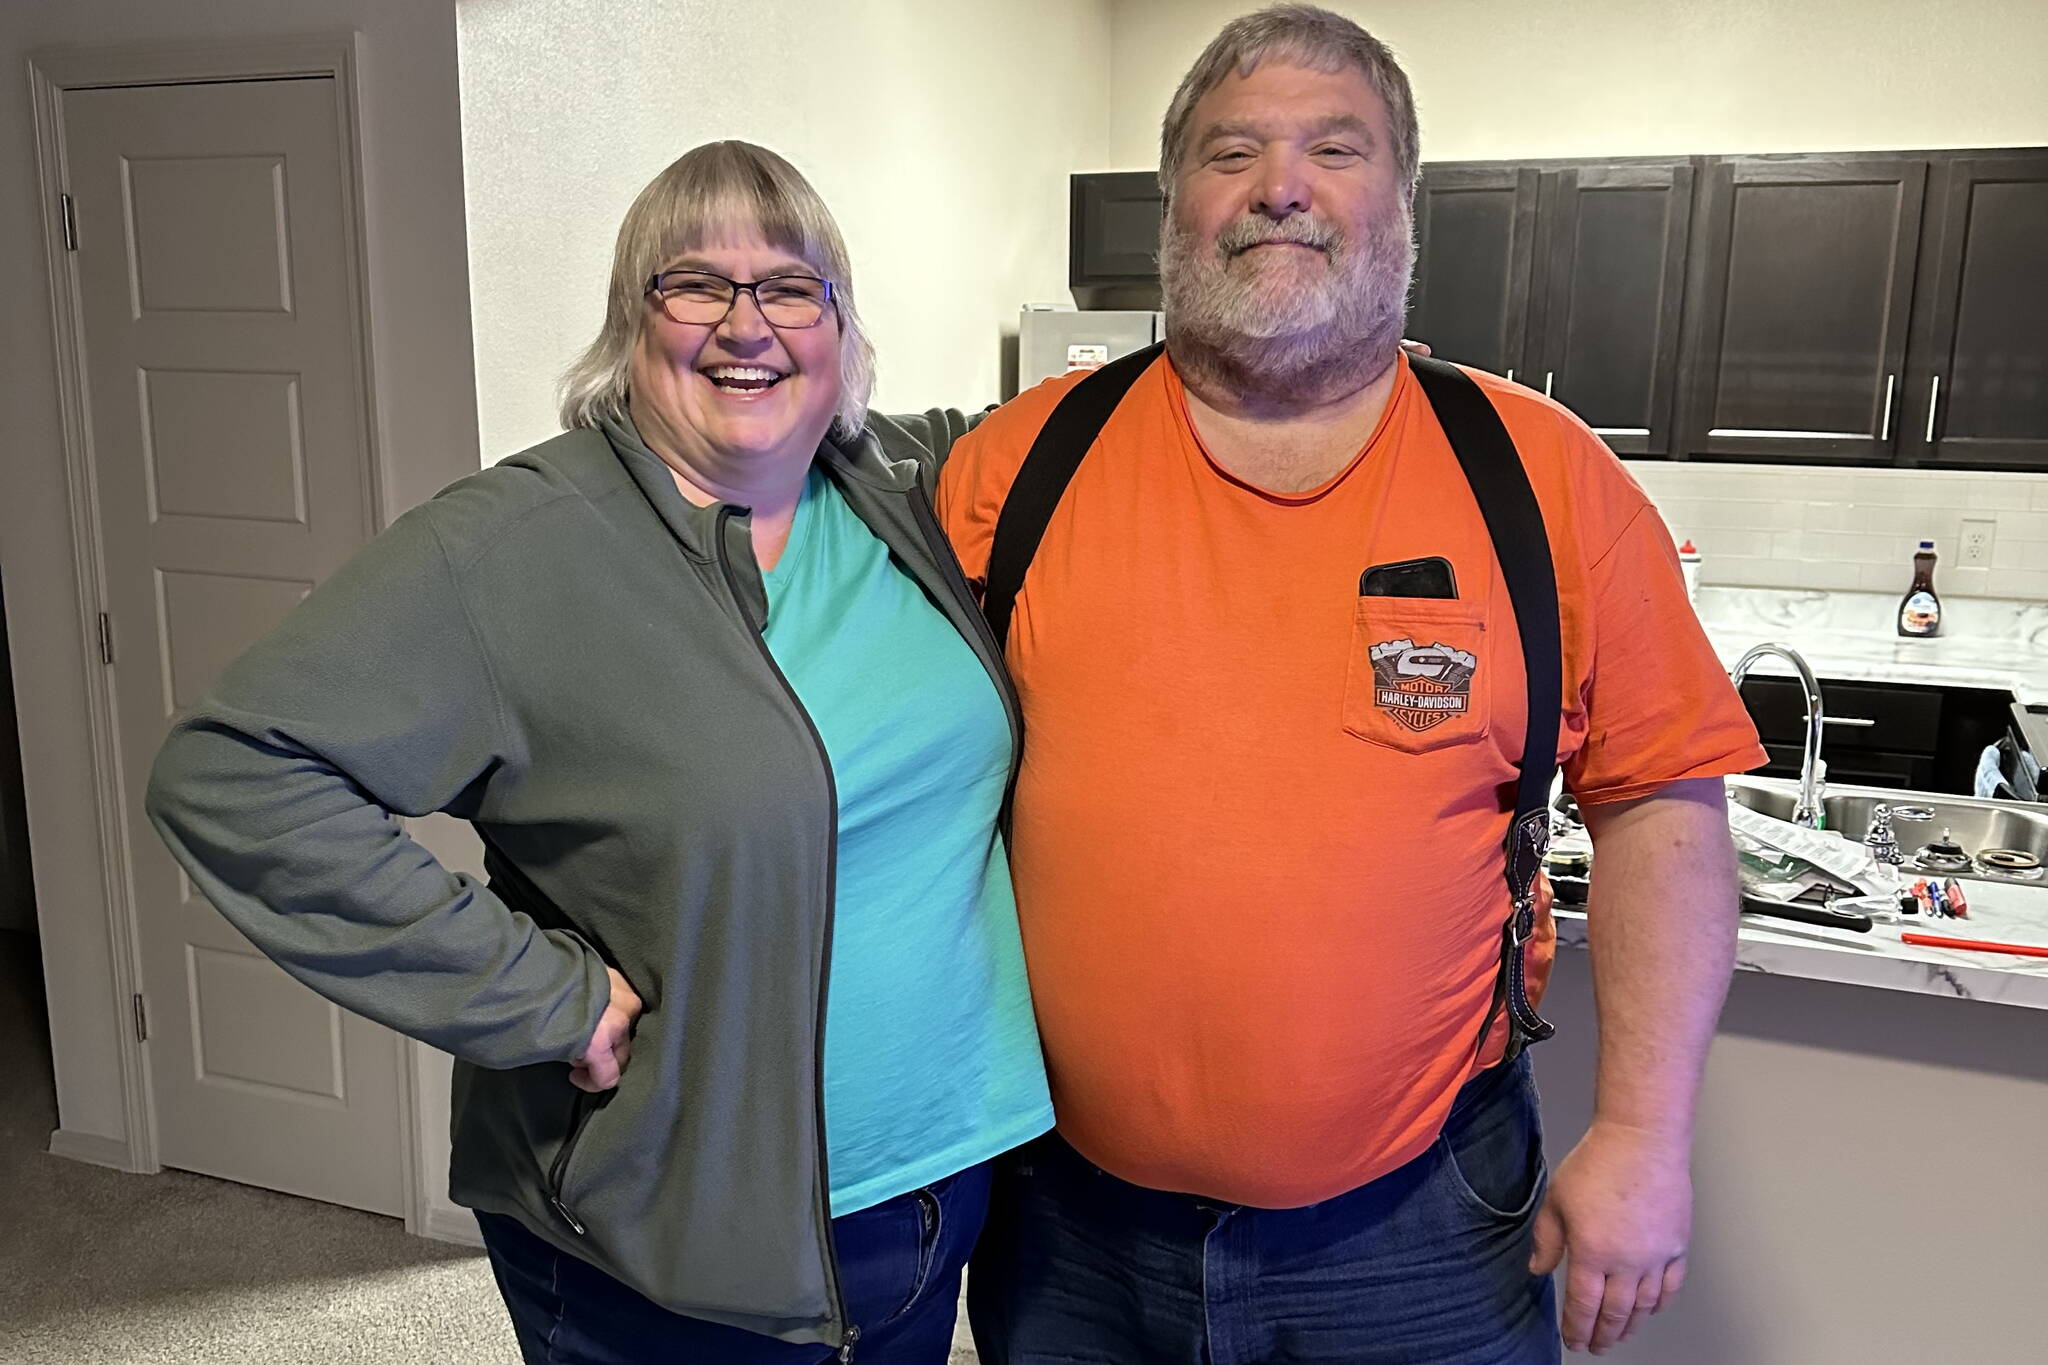 Juneau Mayor Beth Weldon and her husband Greg. (Photo courtesy of the City and Borough of Juneau)